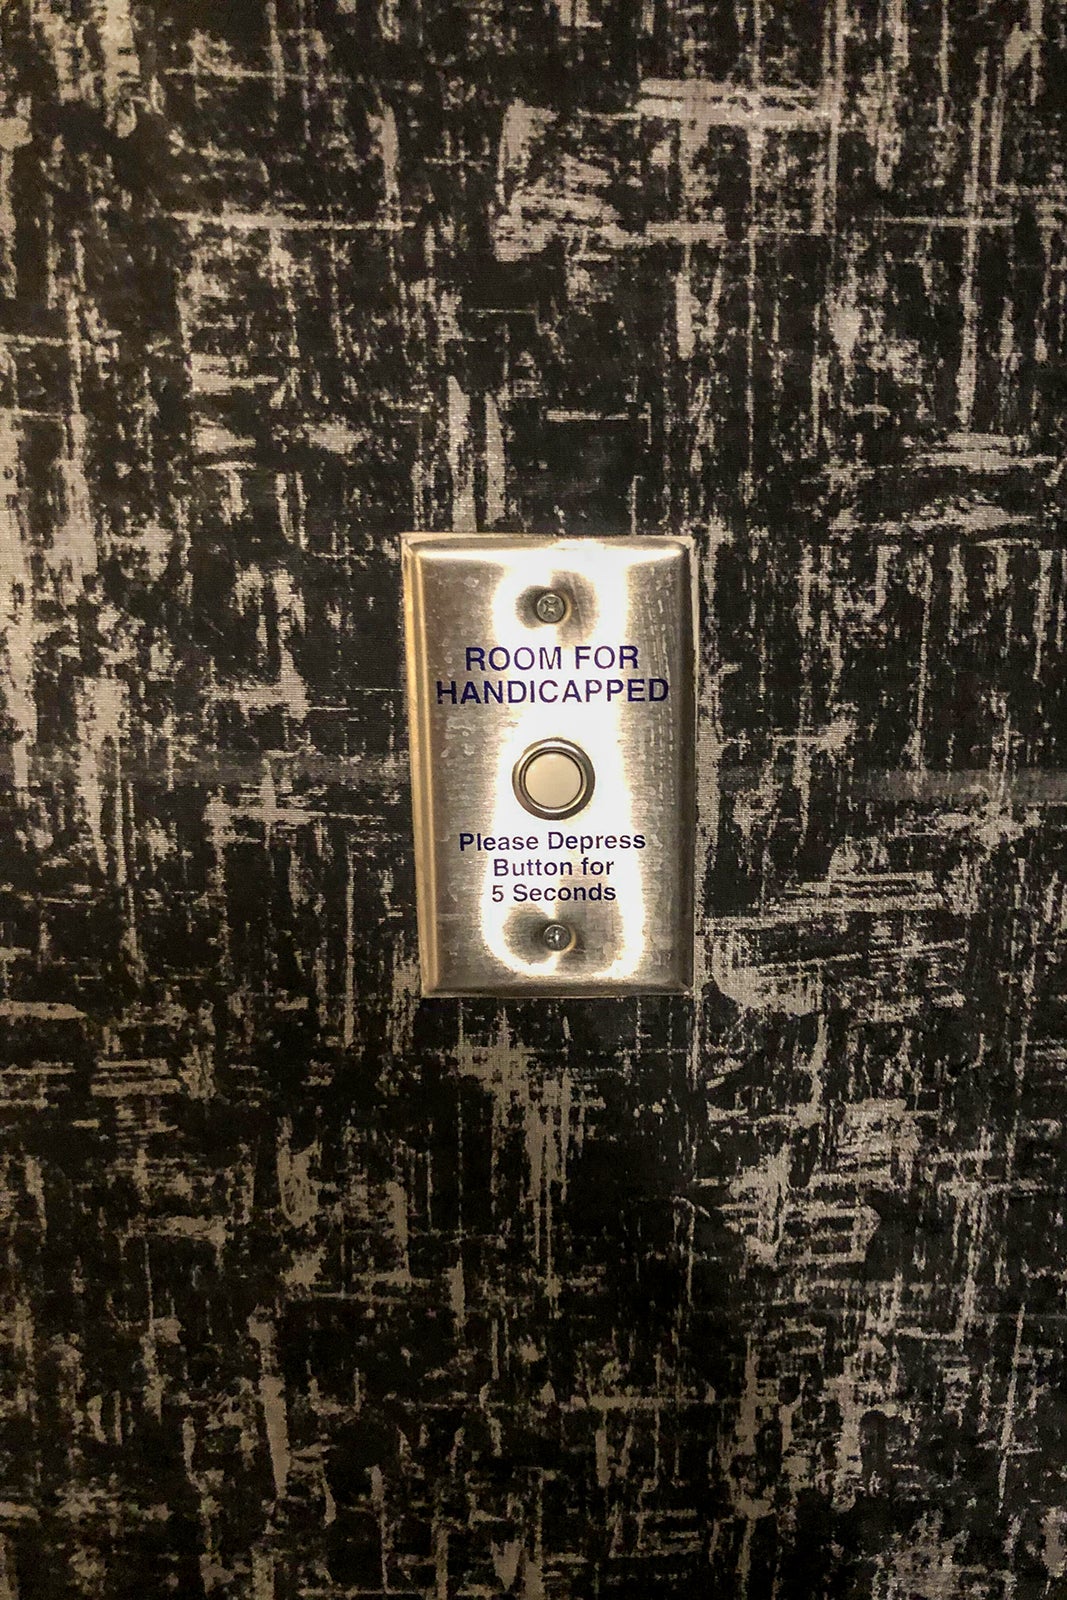 Doorbell for handicapped guests at The Clancy hotel.